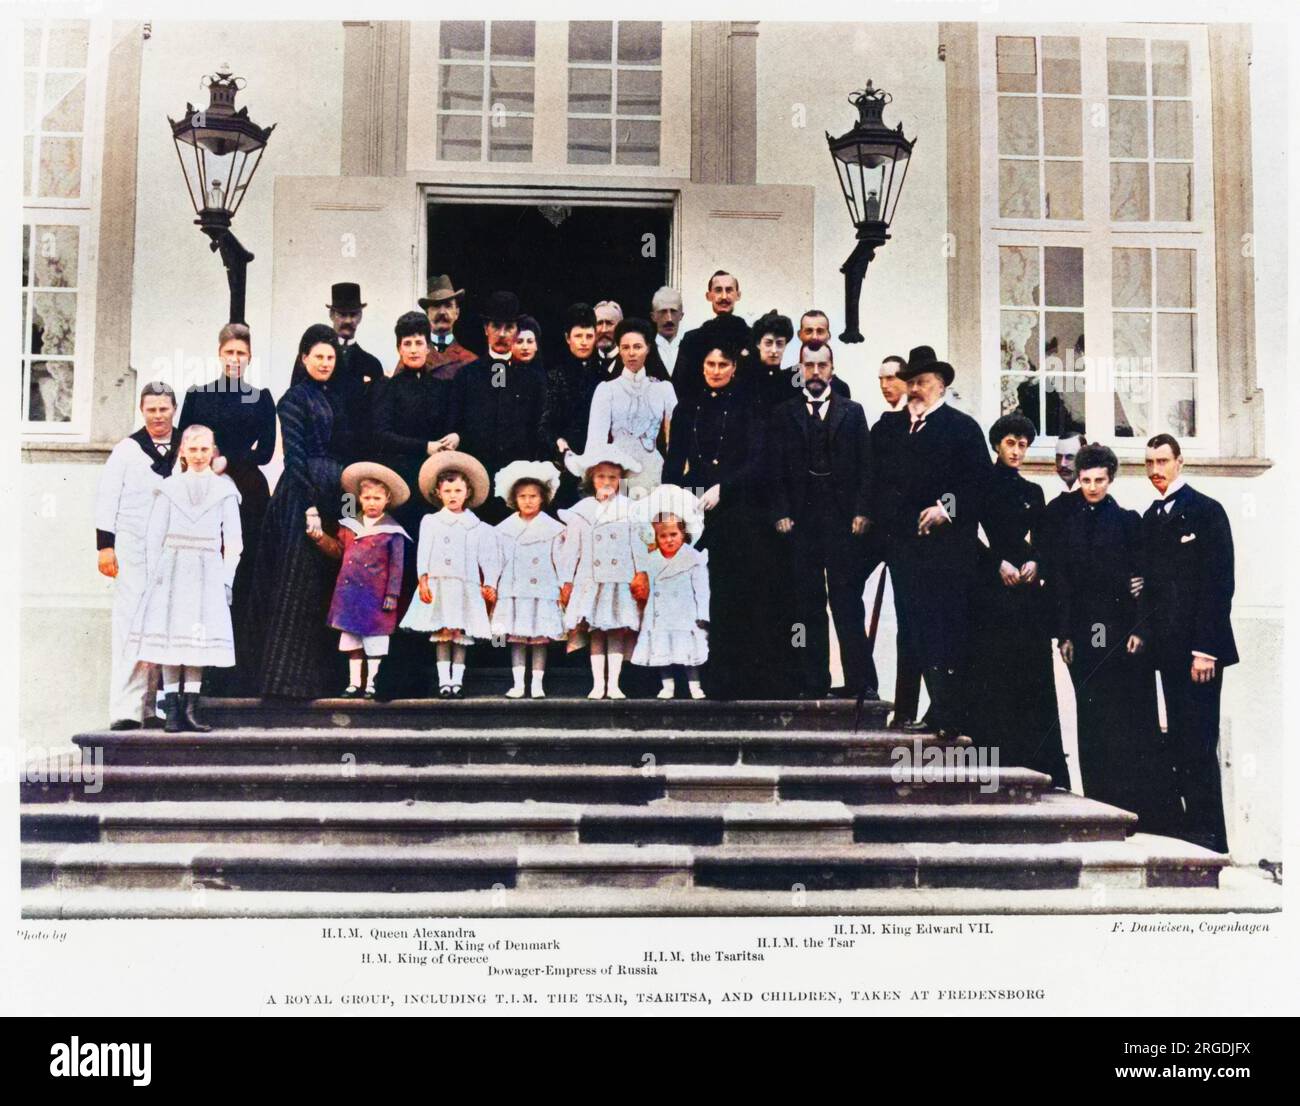 Fredensborg Palace on the island of Zealand in Denmark - Nicolas II - Tsar of Russia pictured the wives and family and other European Royalty, including: King Edward VII, King George I of Greece and King Frederick VIII of Denmark. Stock Photo